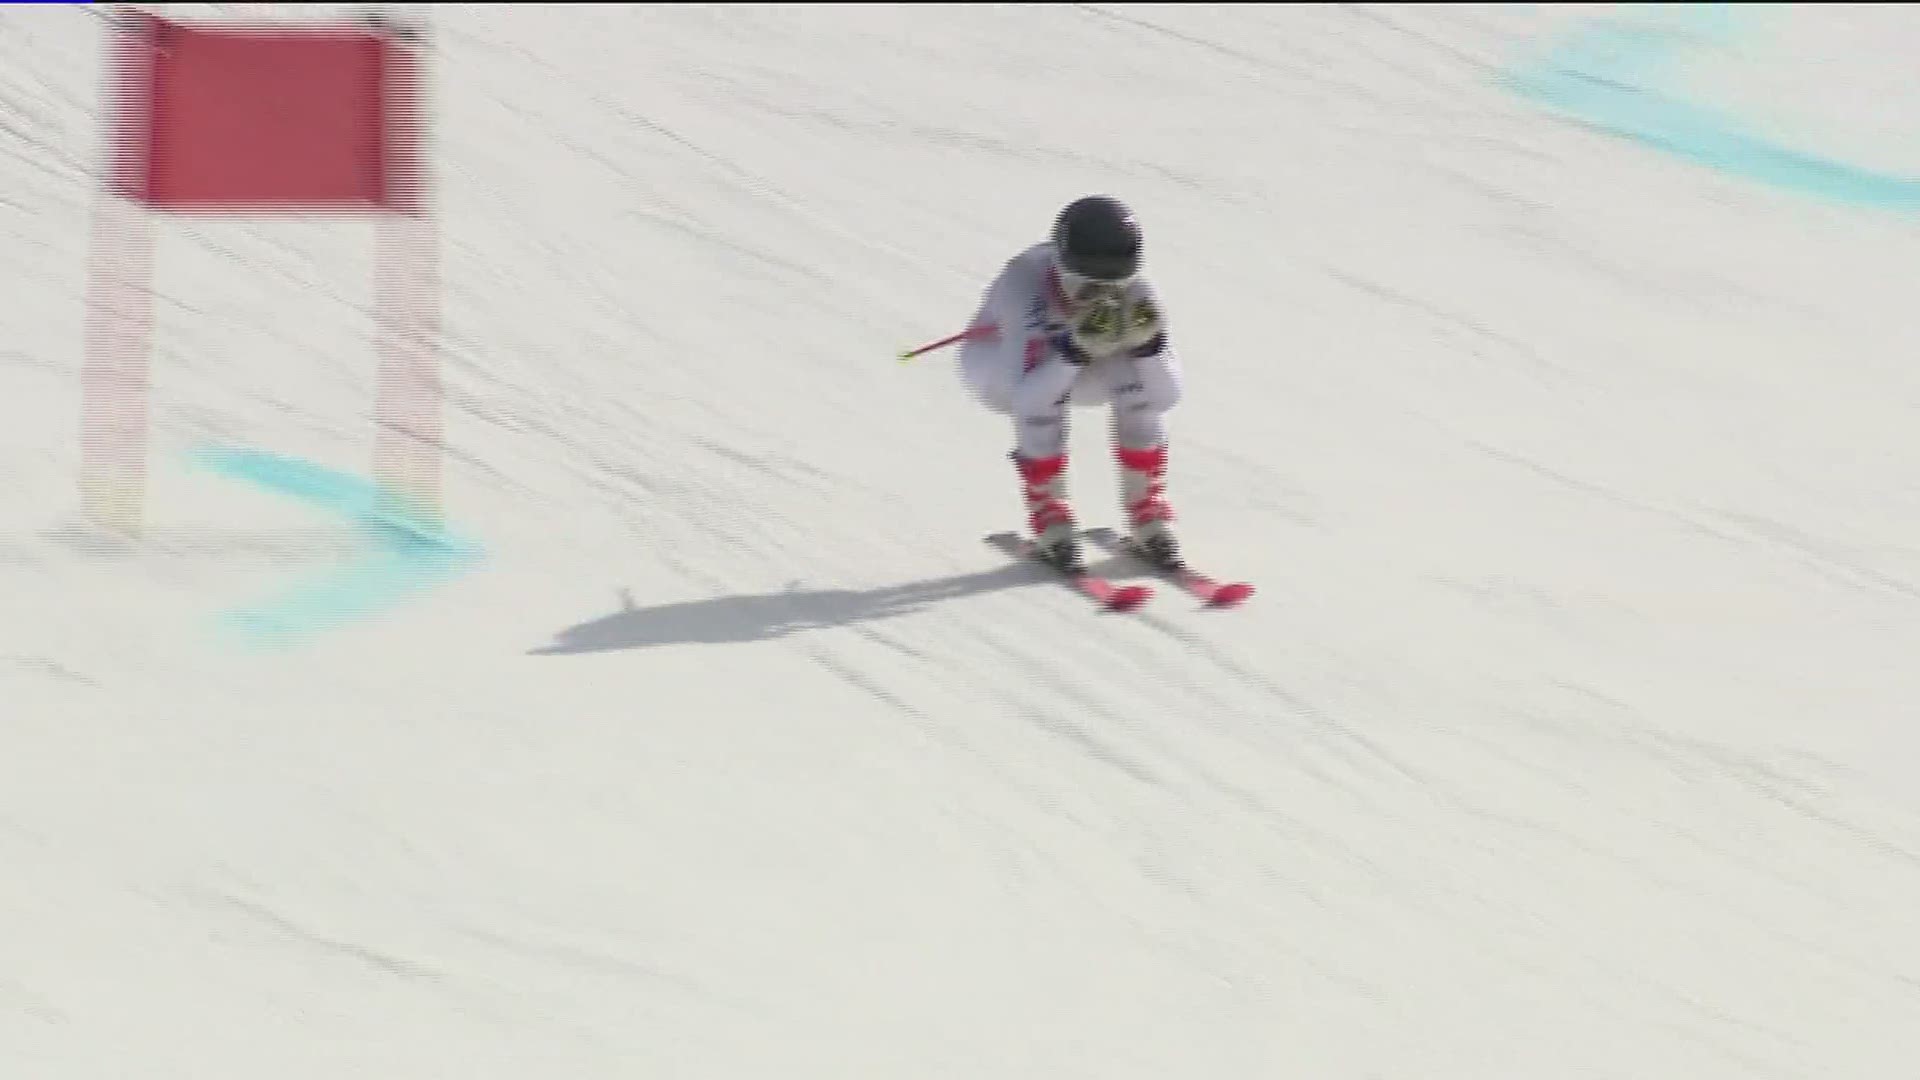 For the first time in the state of Pennsylvania, the Alpine Ski Races were held at a resort in Carbon County.